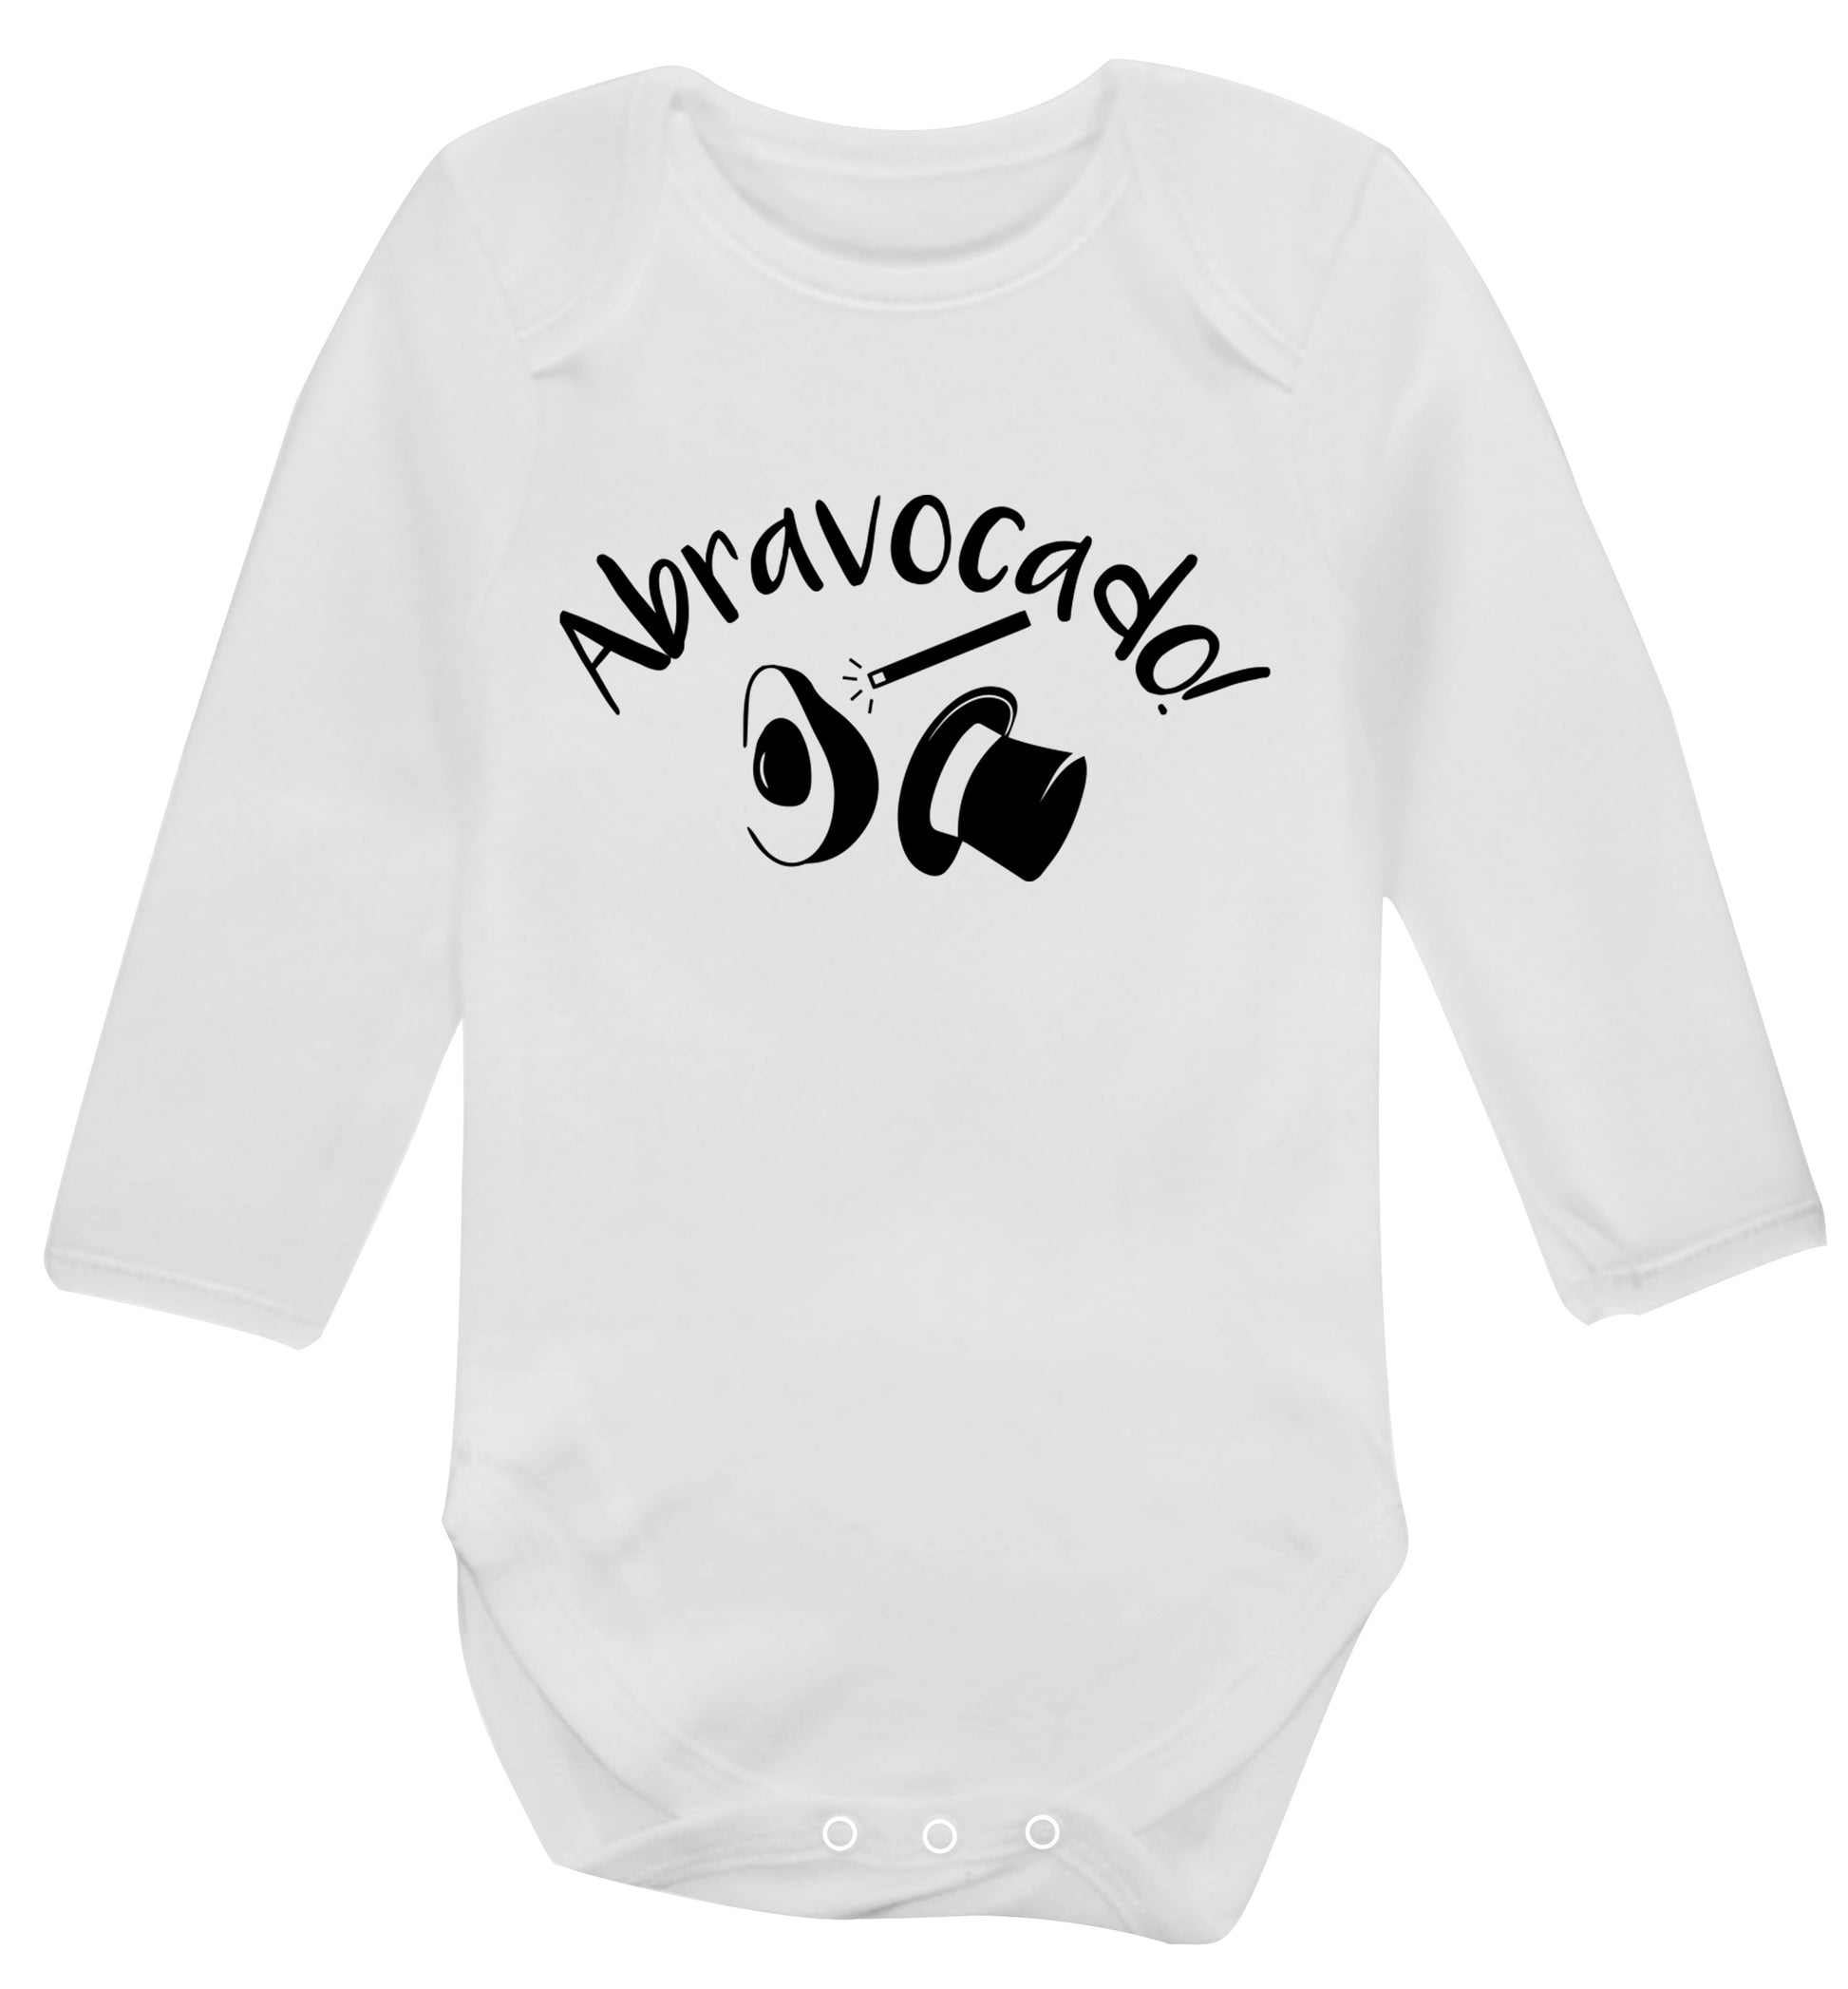 Abravocado Baby Vest long sleeved white 6-12 months